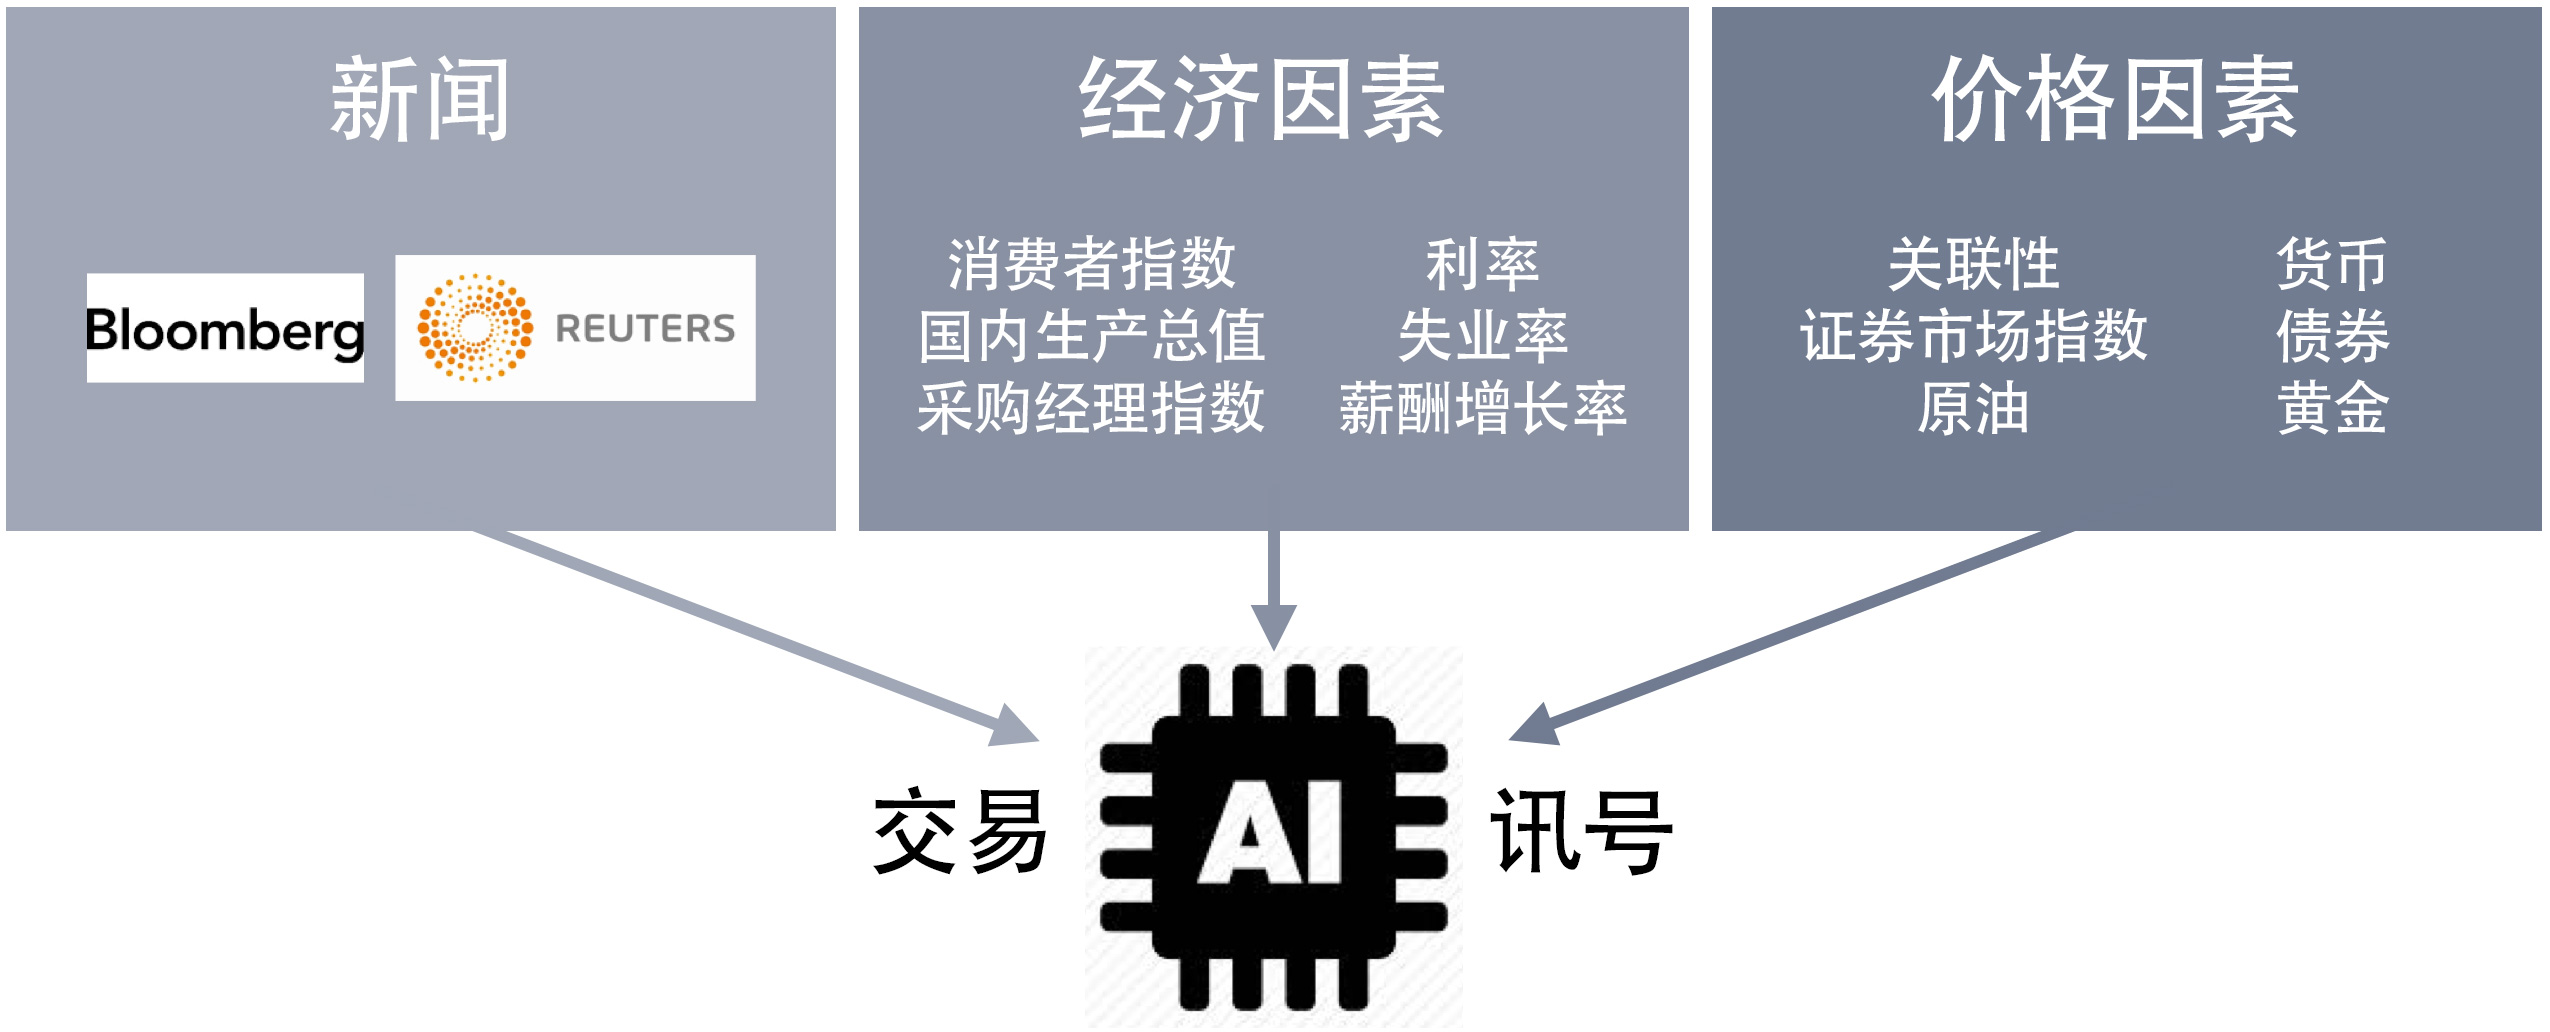 cp-global-artificial-intelligence-trading-signal-chinese